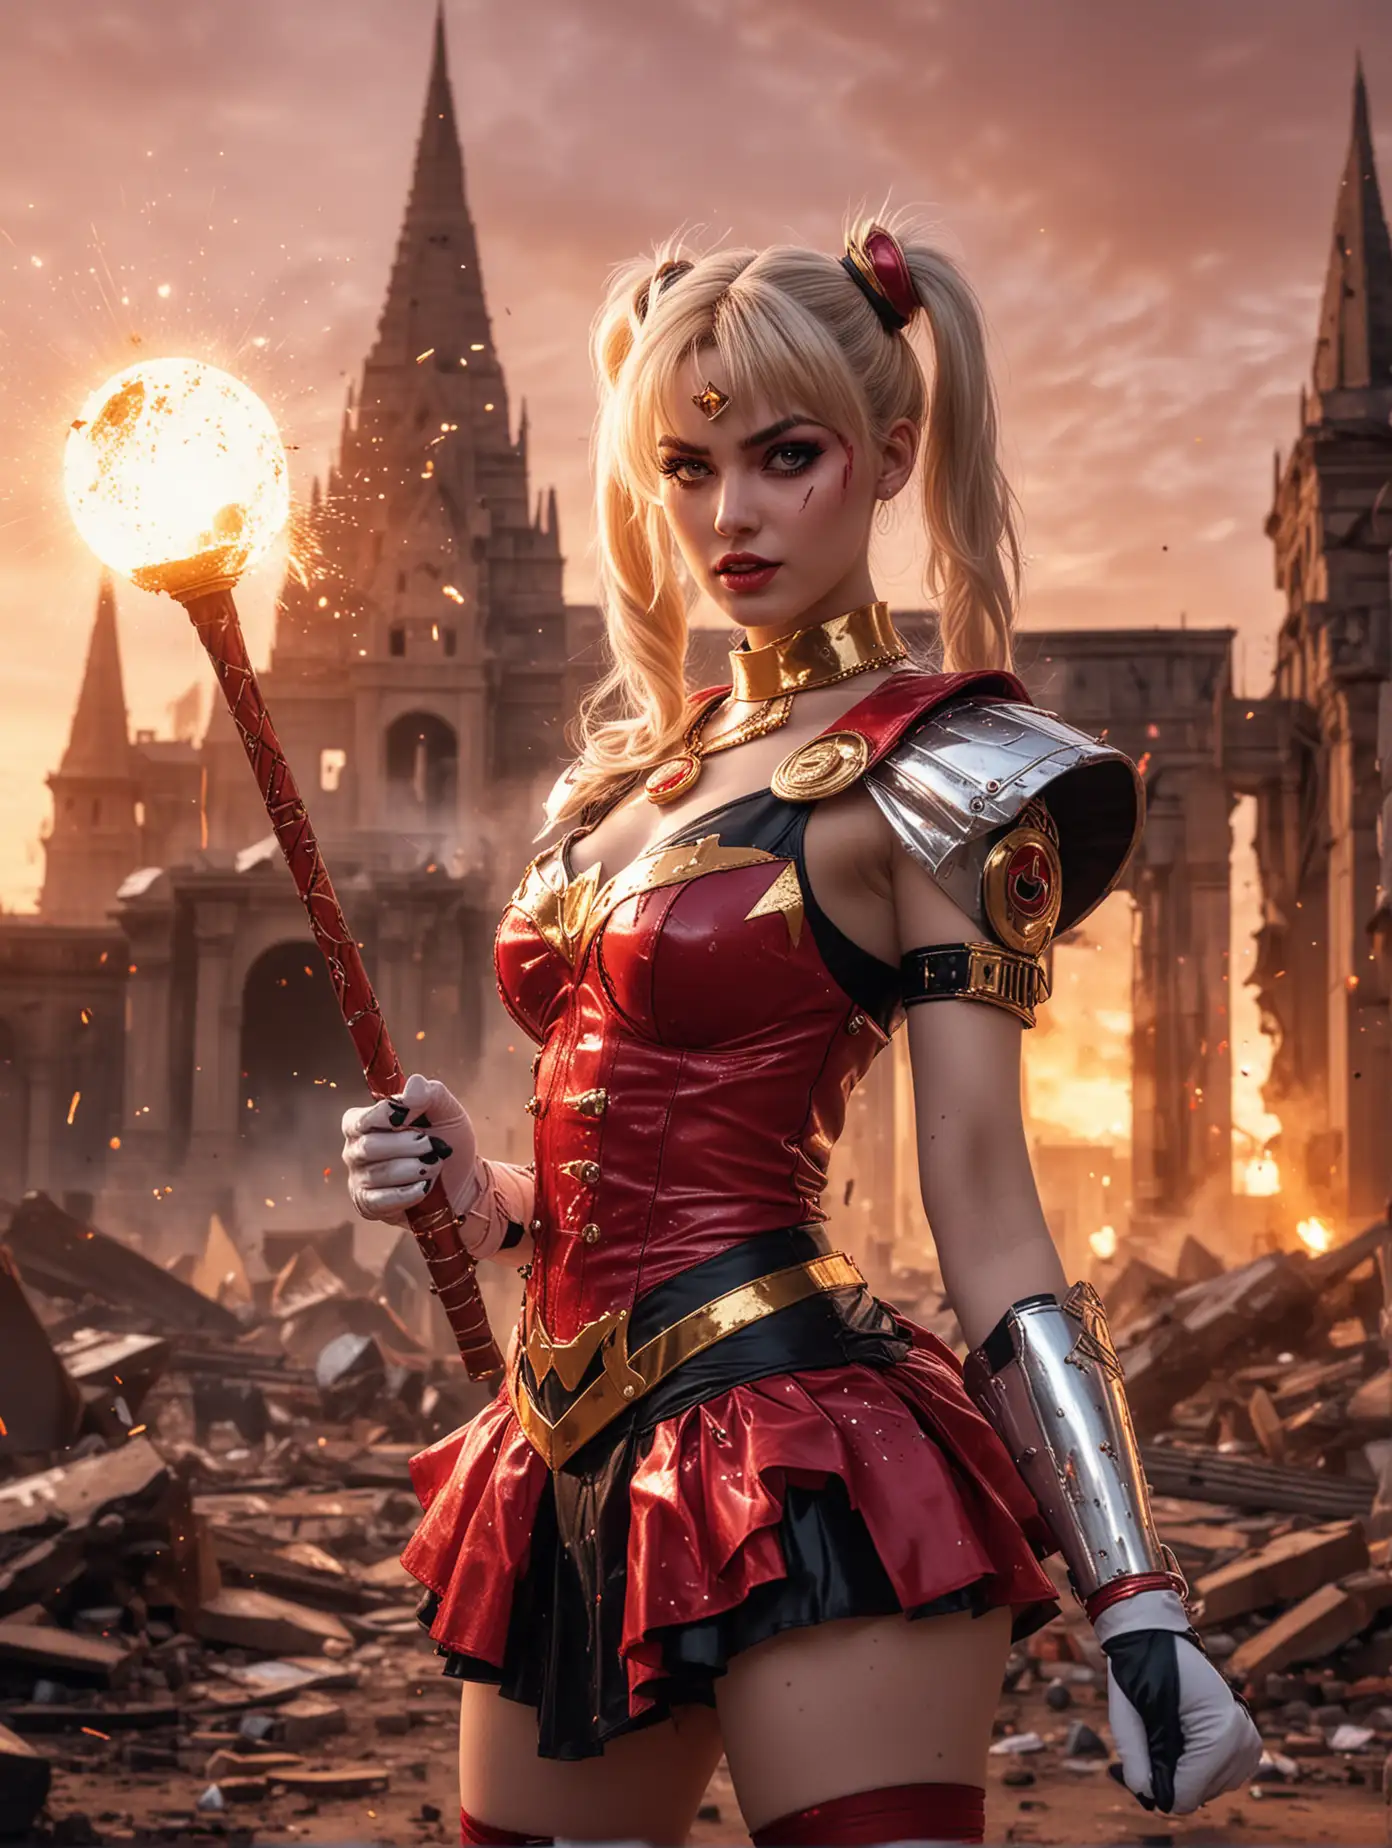 A masterful and striking conceptual art potrait, close up portrait, close up shot, showcasing beauty Sailormoon was cosplaying as Harley Queen, holding a baseball's bat, deeply immersed in the chaotic energy of a war Zone with explosions everywhere. Dynamic martial action pose at pyramide temple background with amazing ray tracing of sunset light.